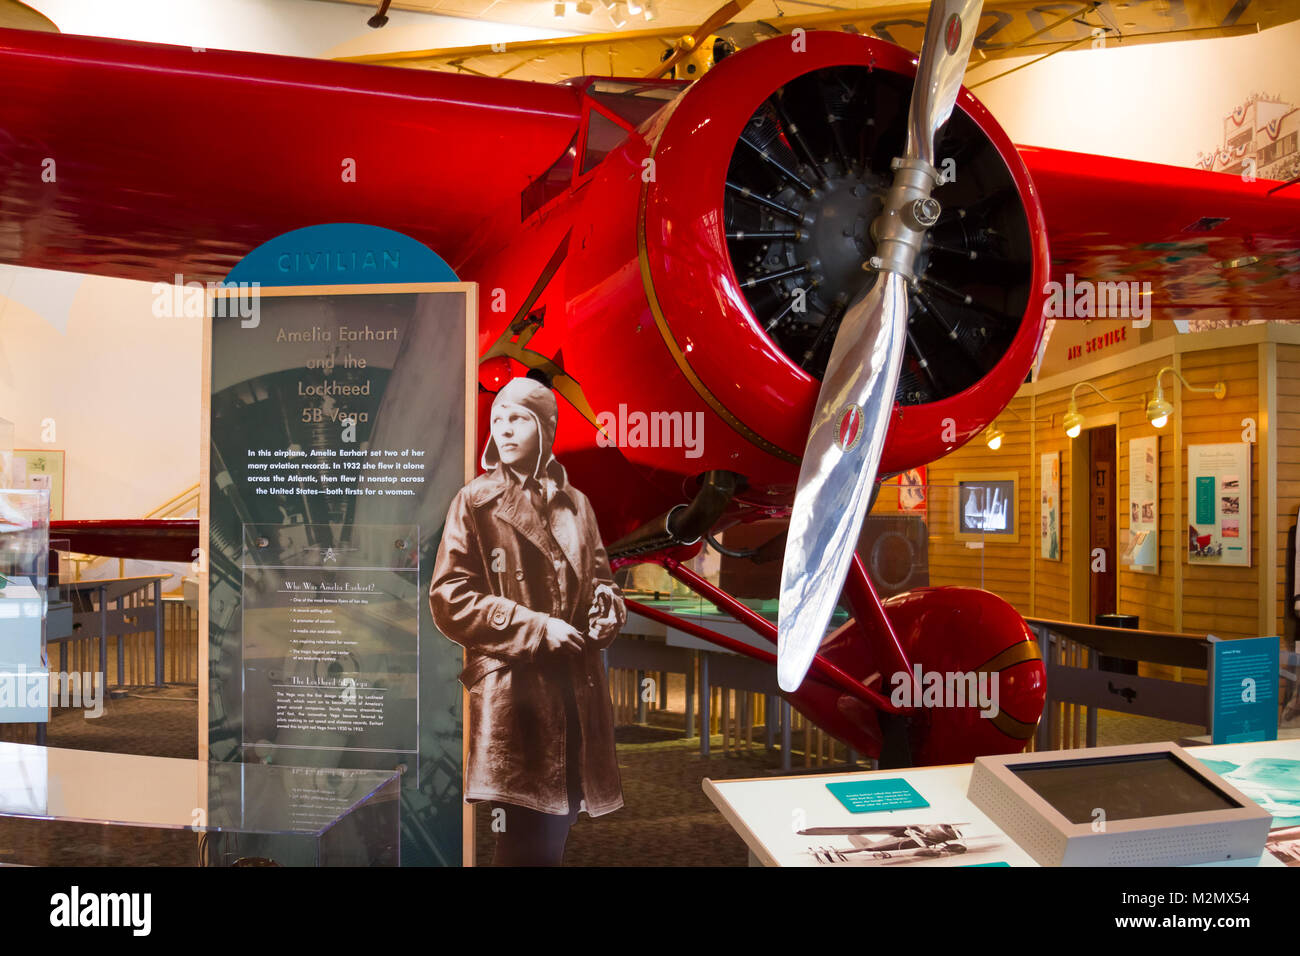 WASHINGTON D.C., USA - MAY 11, 2016: Amelia Earhart and red Lockheed 5B Vega First woman to attempt to circumnavigate the Globe, National Air and Spac Stock Photo